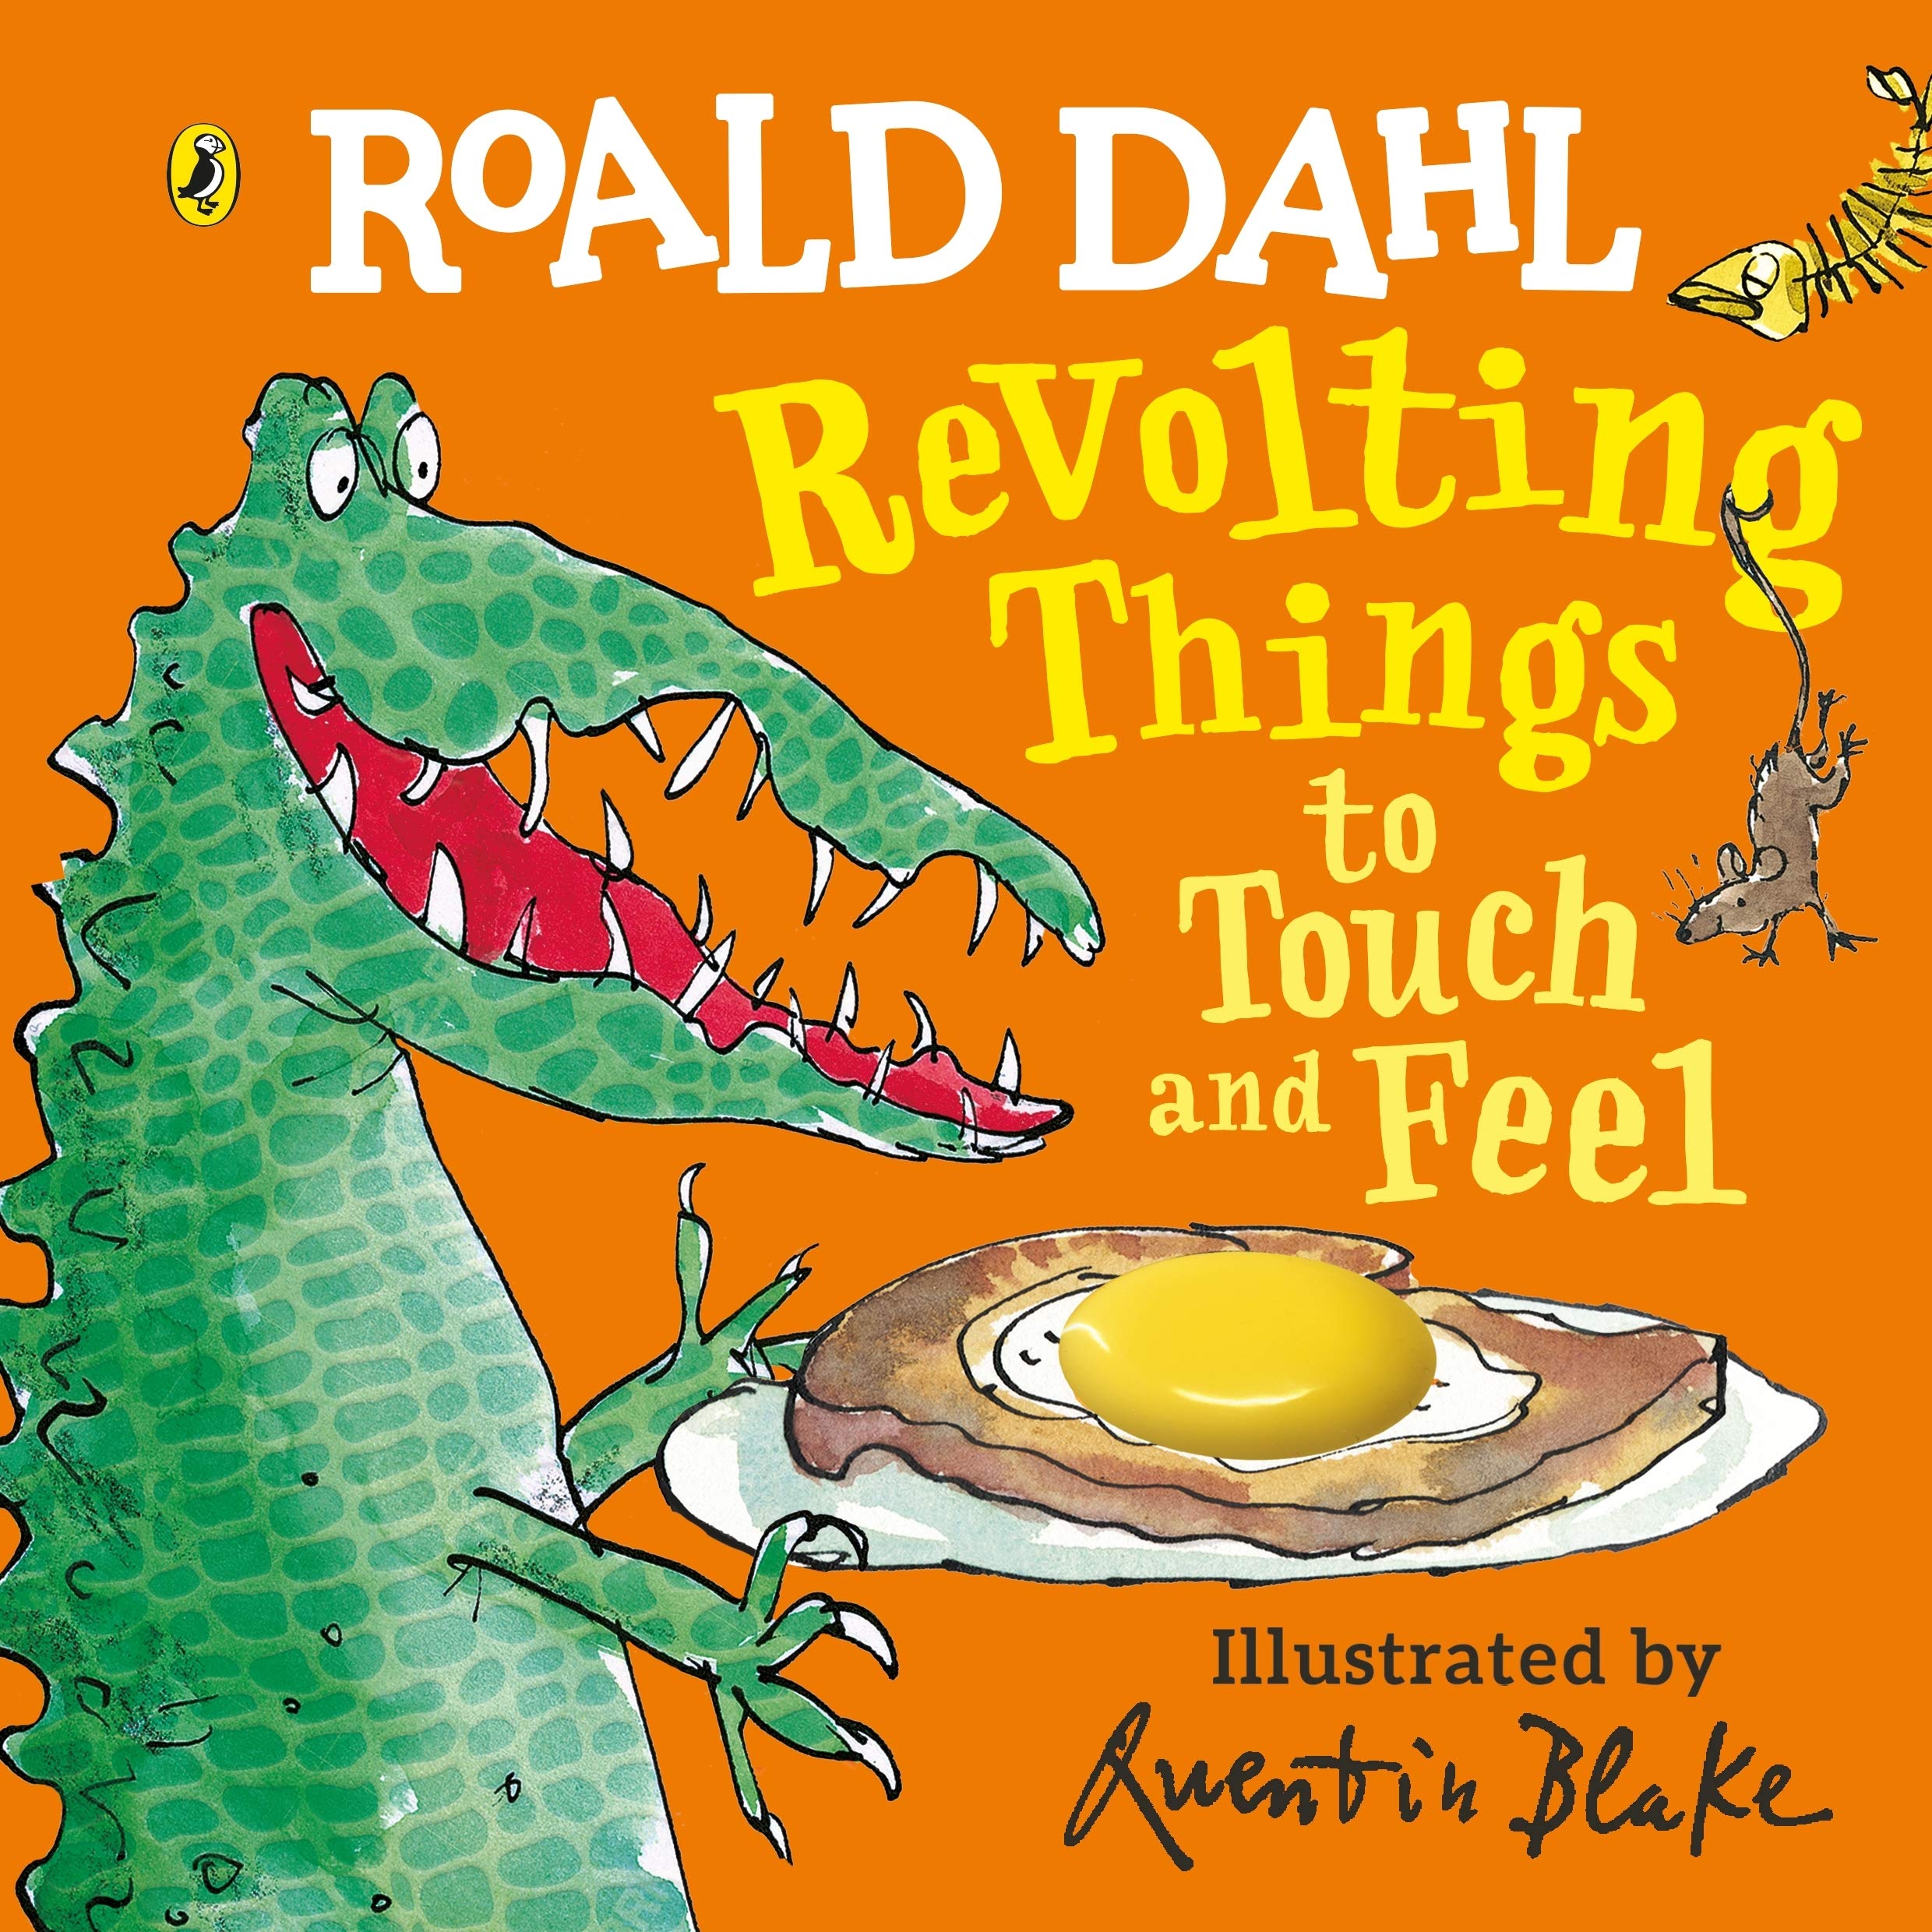 Roald Dahl revolting things to touch and feel